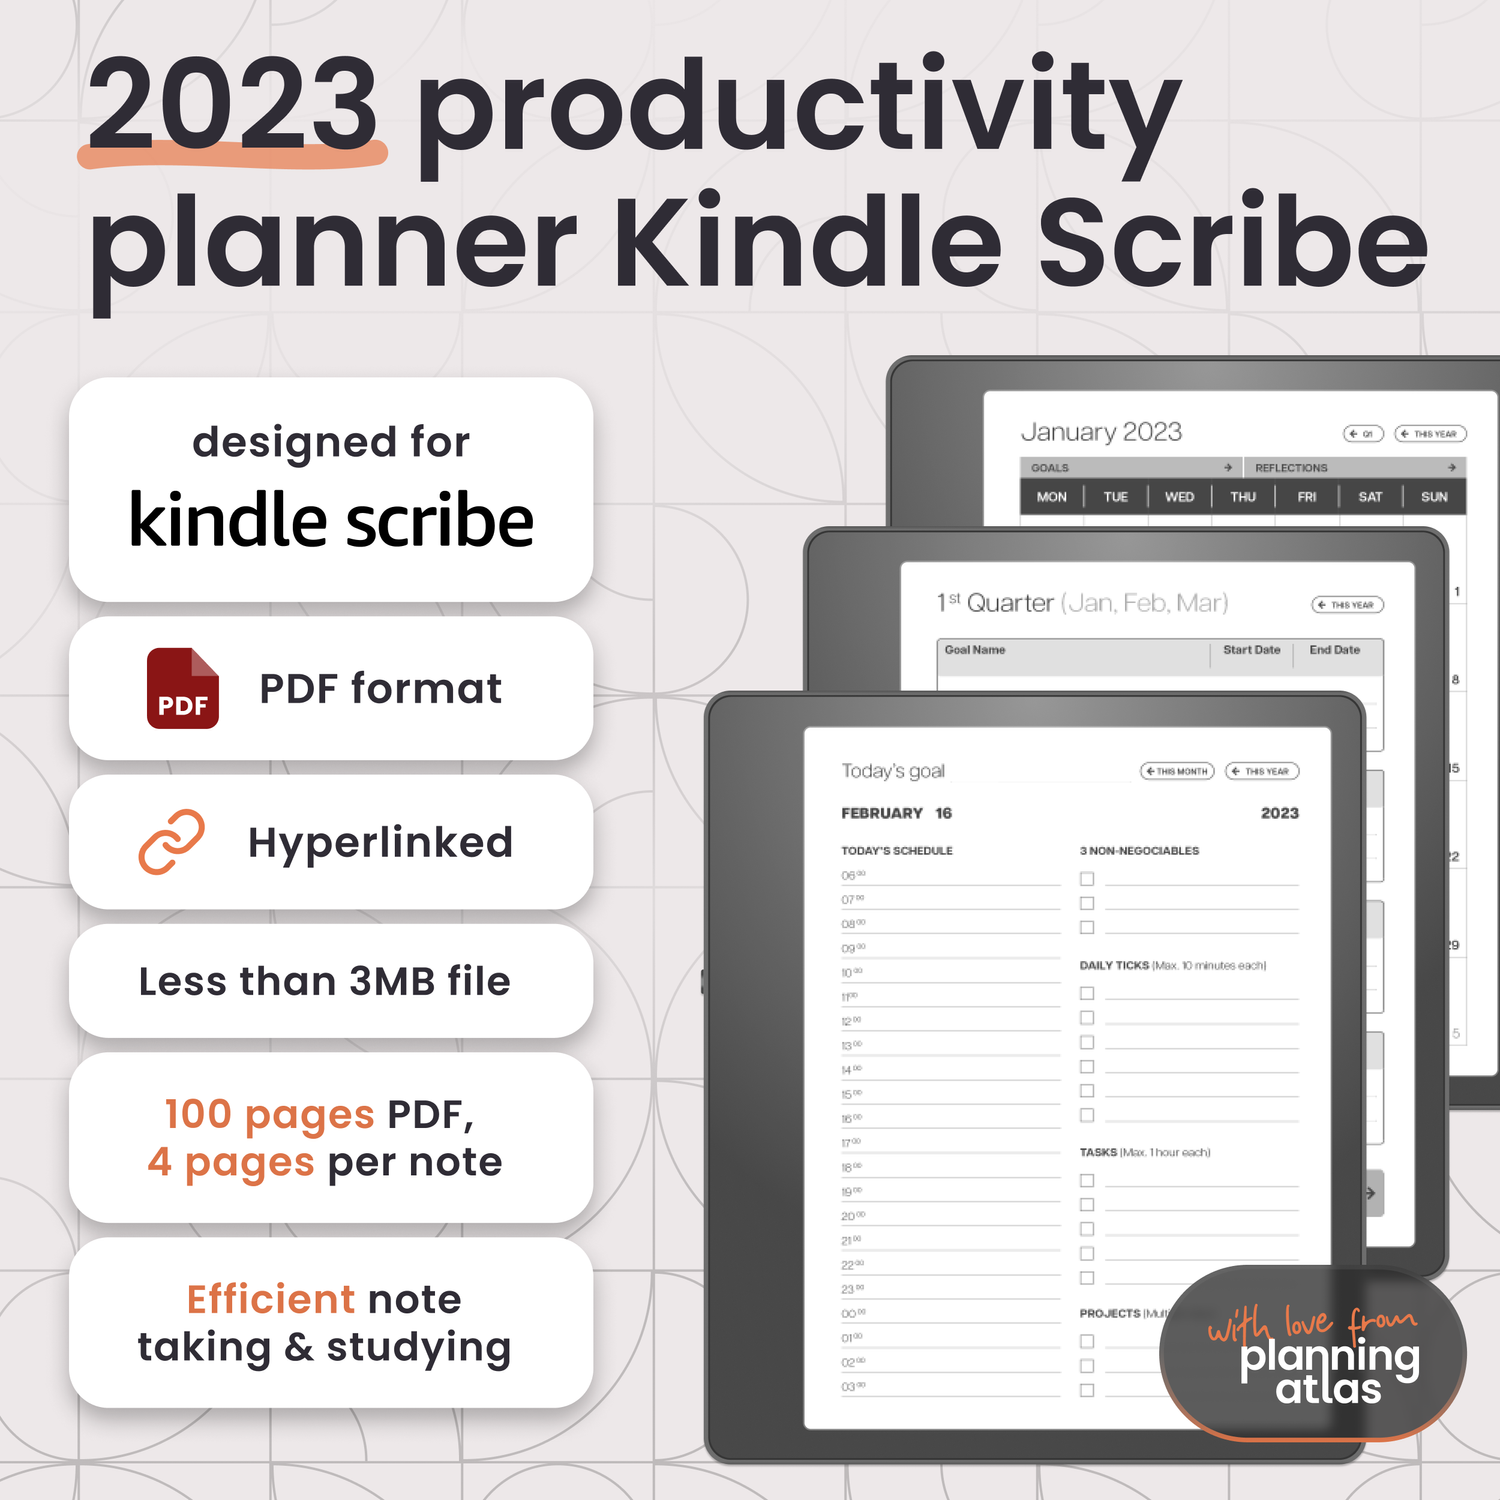 Kindle Scribe 2023 Planner Modern Design Easy Navigation Through  Hyperlinks, Stylish Annual, Daily and Monthly Agenda Calendar, PDF Template  